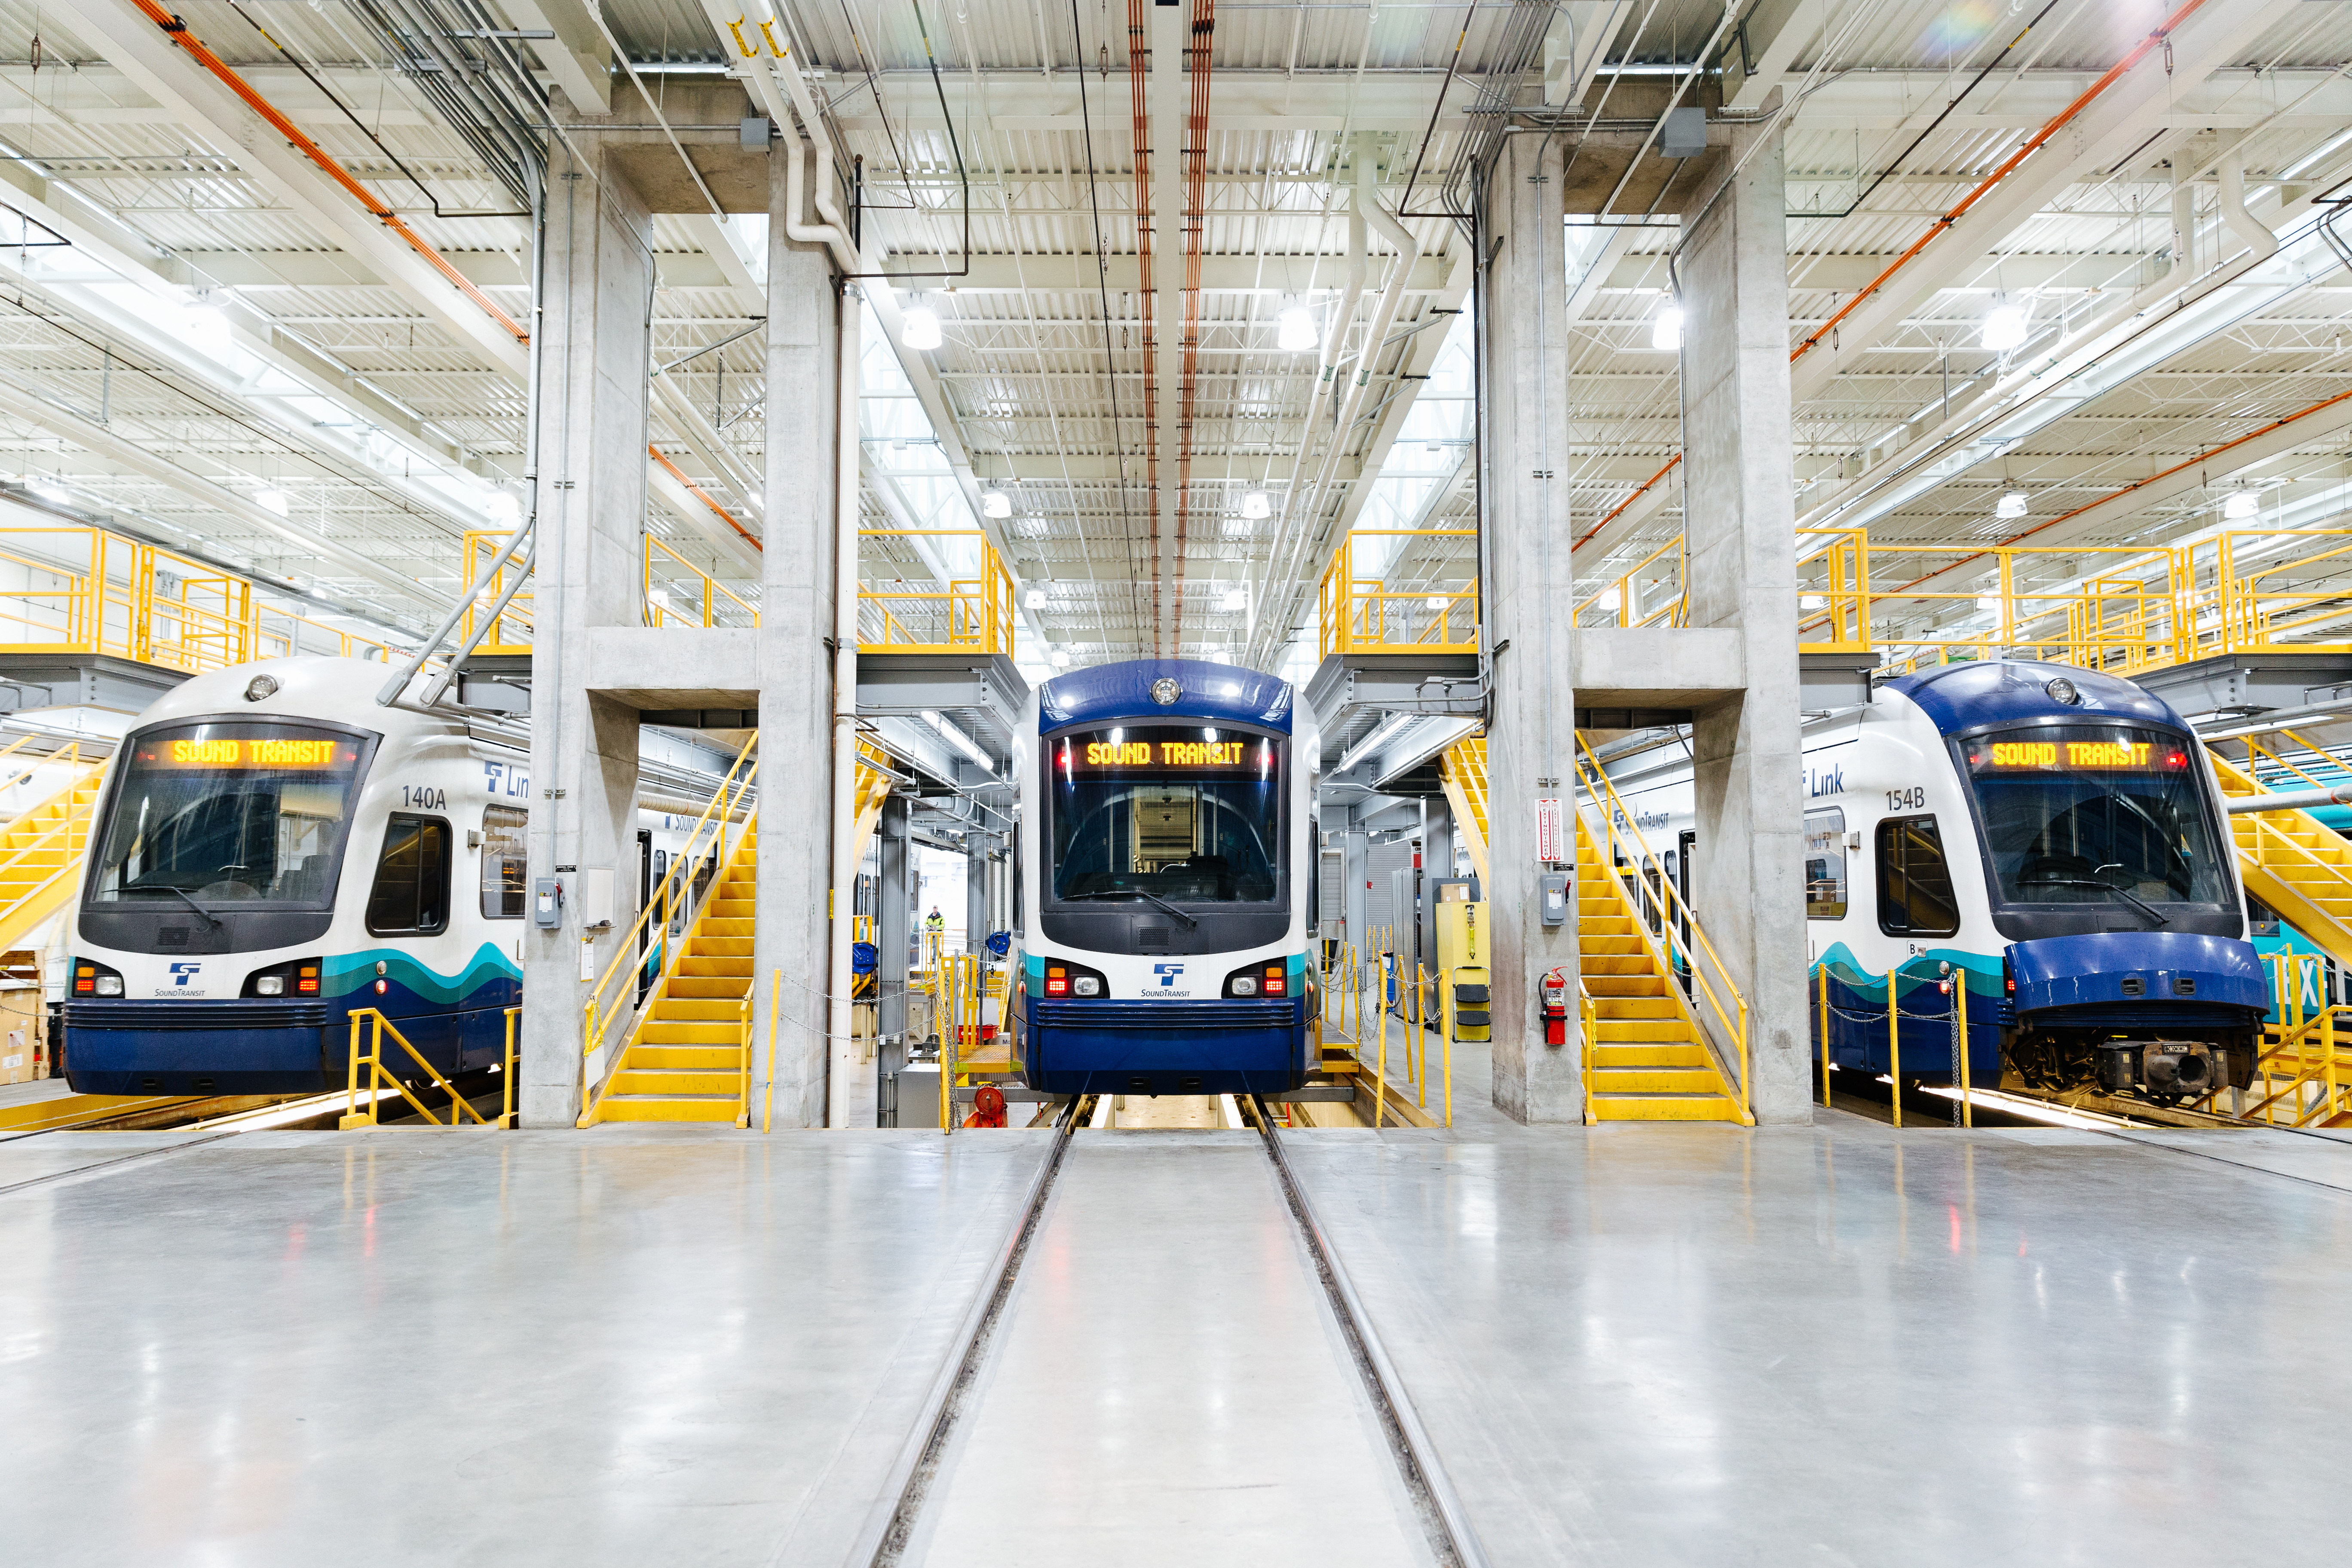 Link light rail trains are staged on maintenance platforms in the Link Storage Building. Stairs are provided on the platform so that workers can access both the top of the train and the underside of the train to perform routine maintenance.